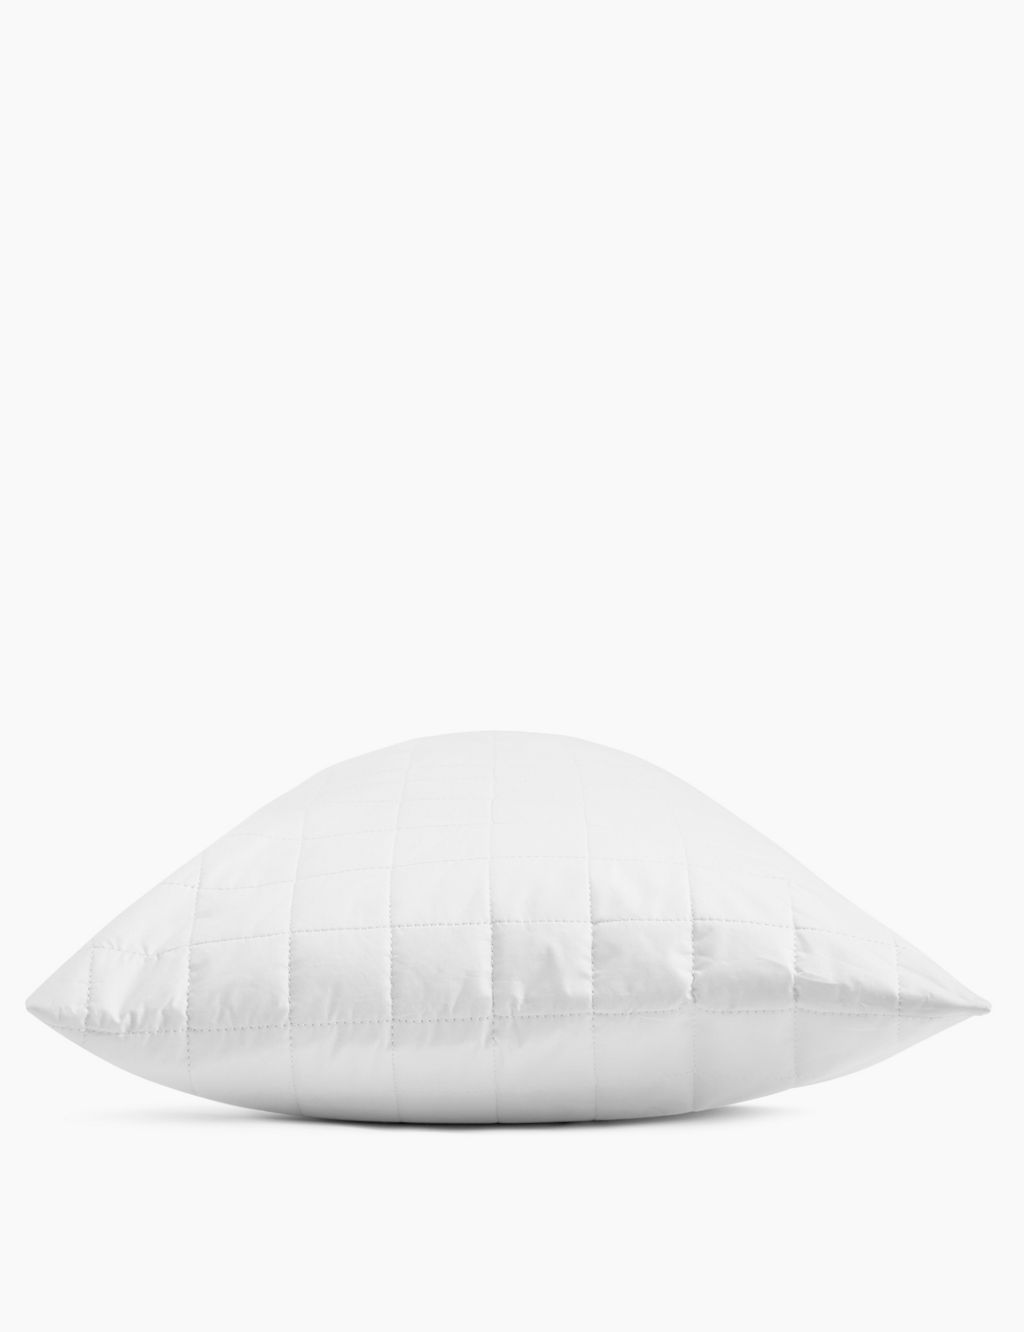 Feels Like Down Pillow Protector 4 of 4